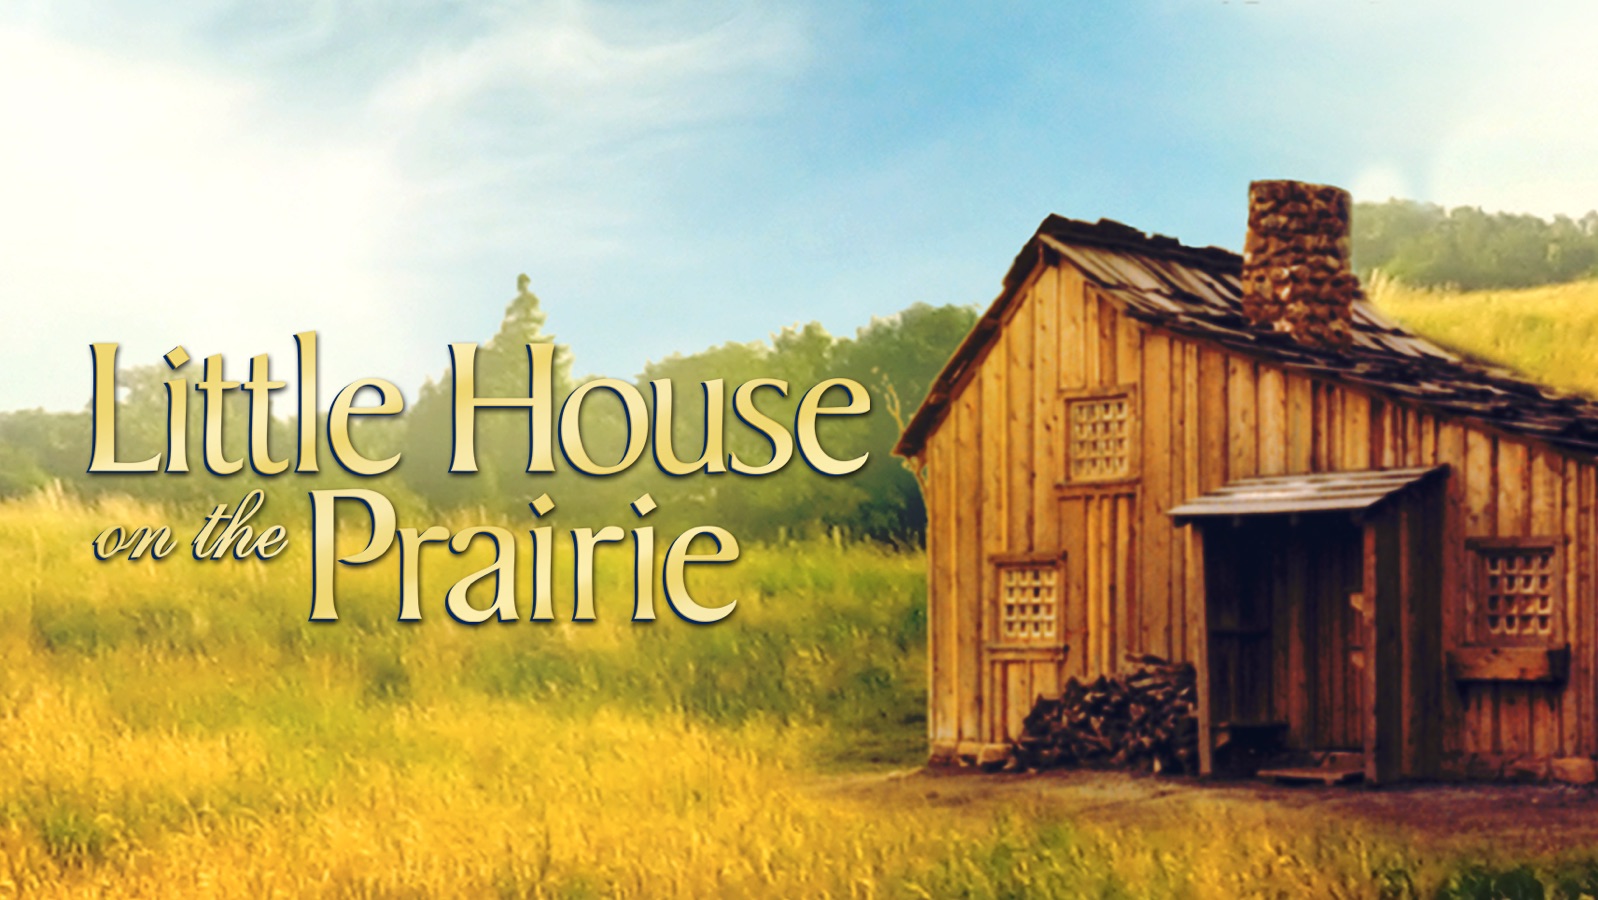 The little House. Big House and little House. Let's Play little House. On the Prairie.